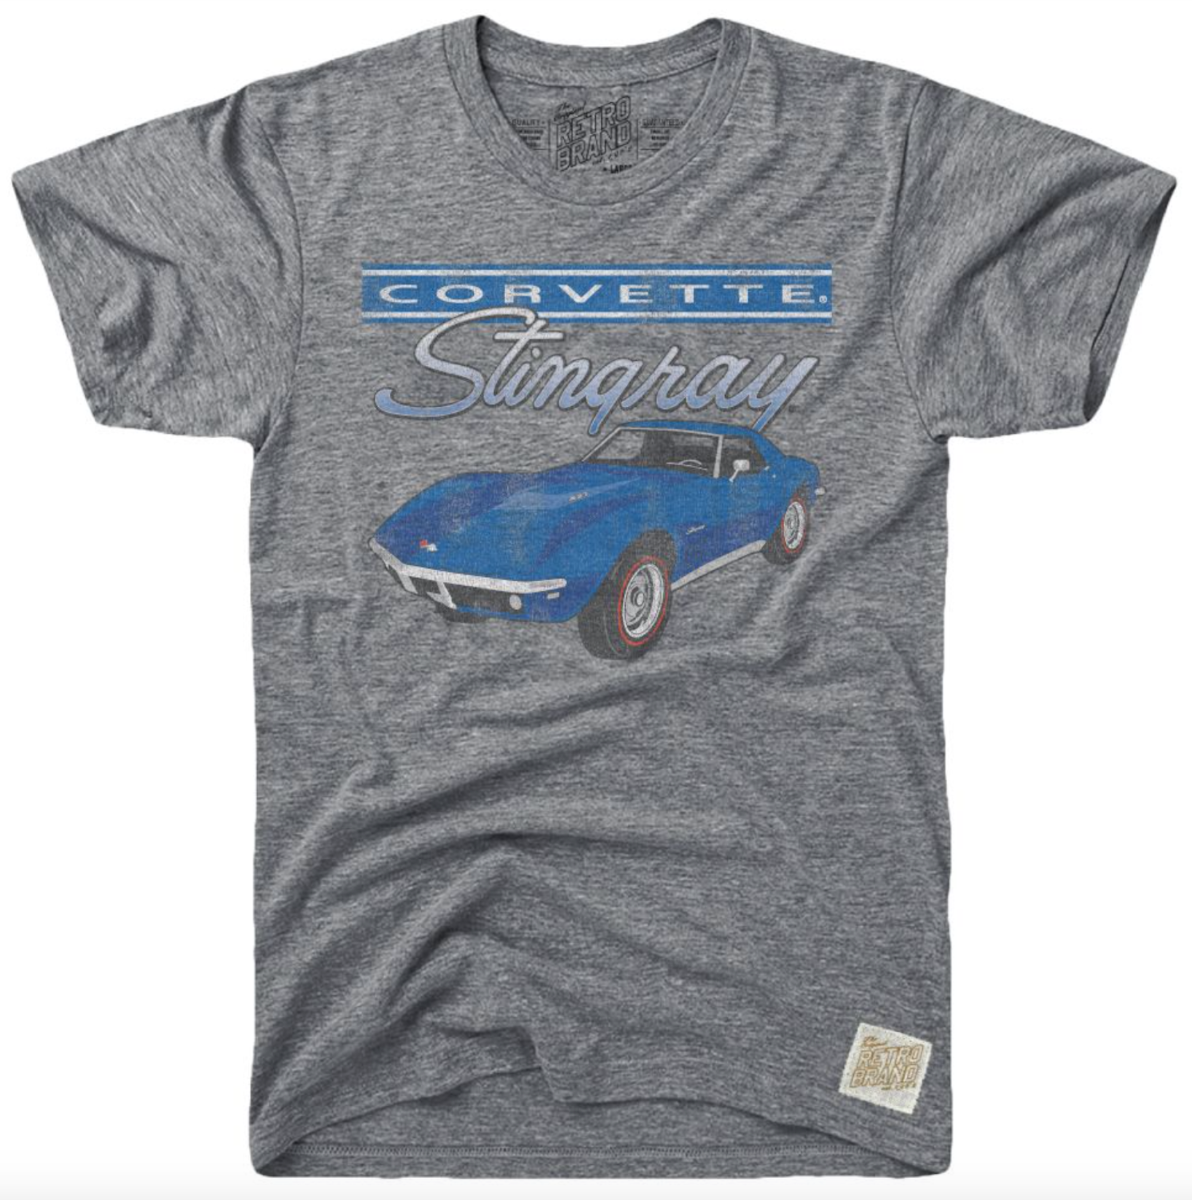 Corvette Stingray graphic in blue on our tri-blend unisex short sleeve tee in streaky gray